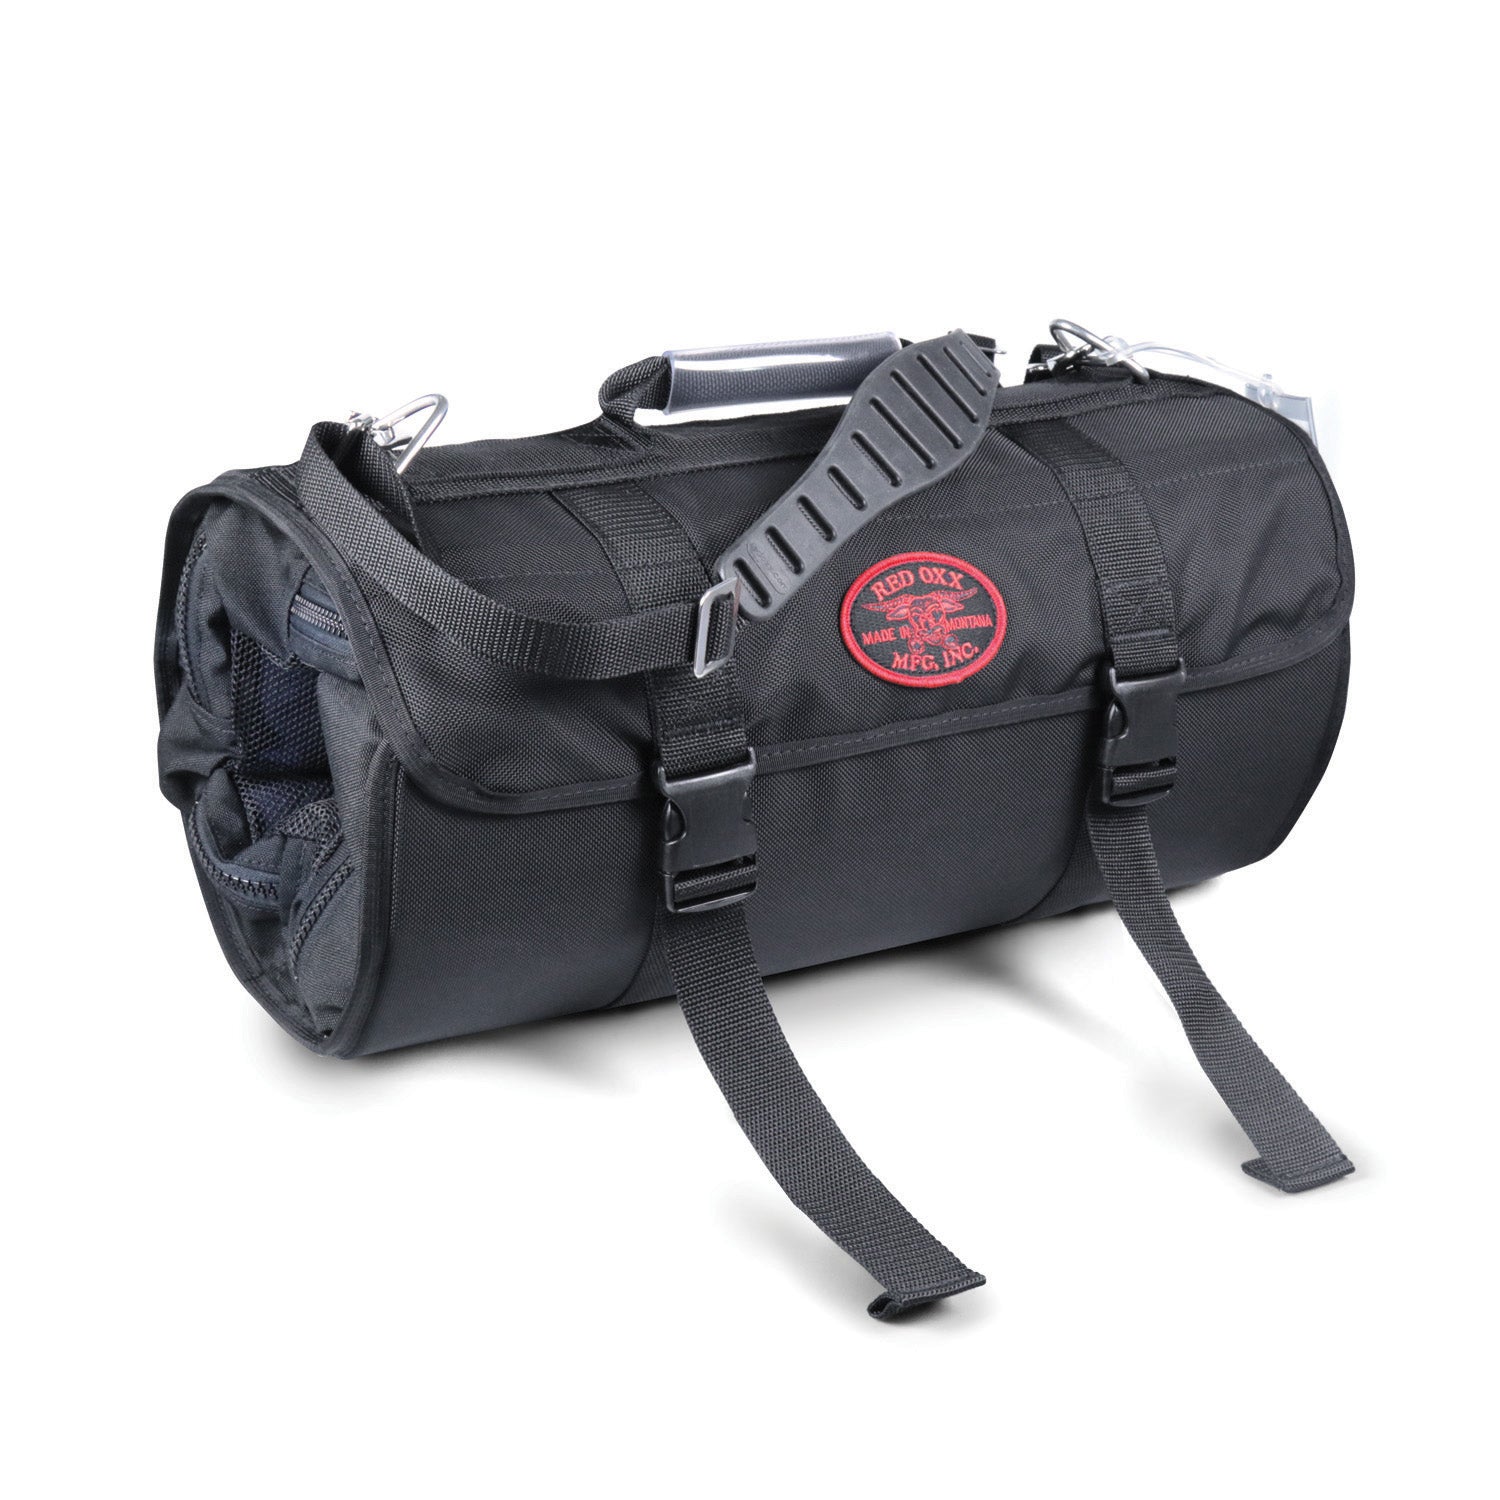 Tool roll in the closed position.  Shoulder strap and handle for maximum utility for carrying. 